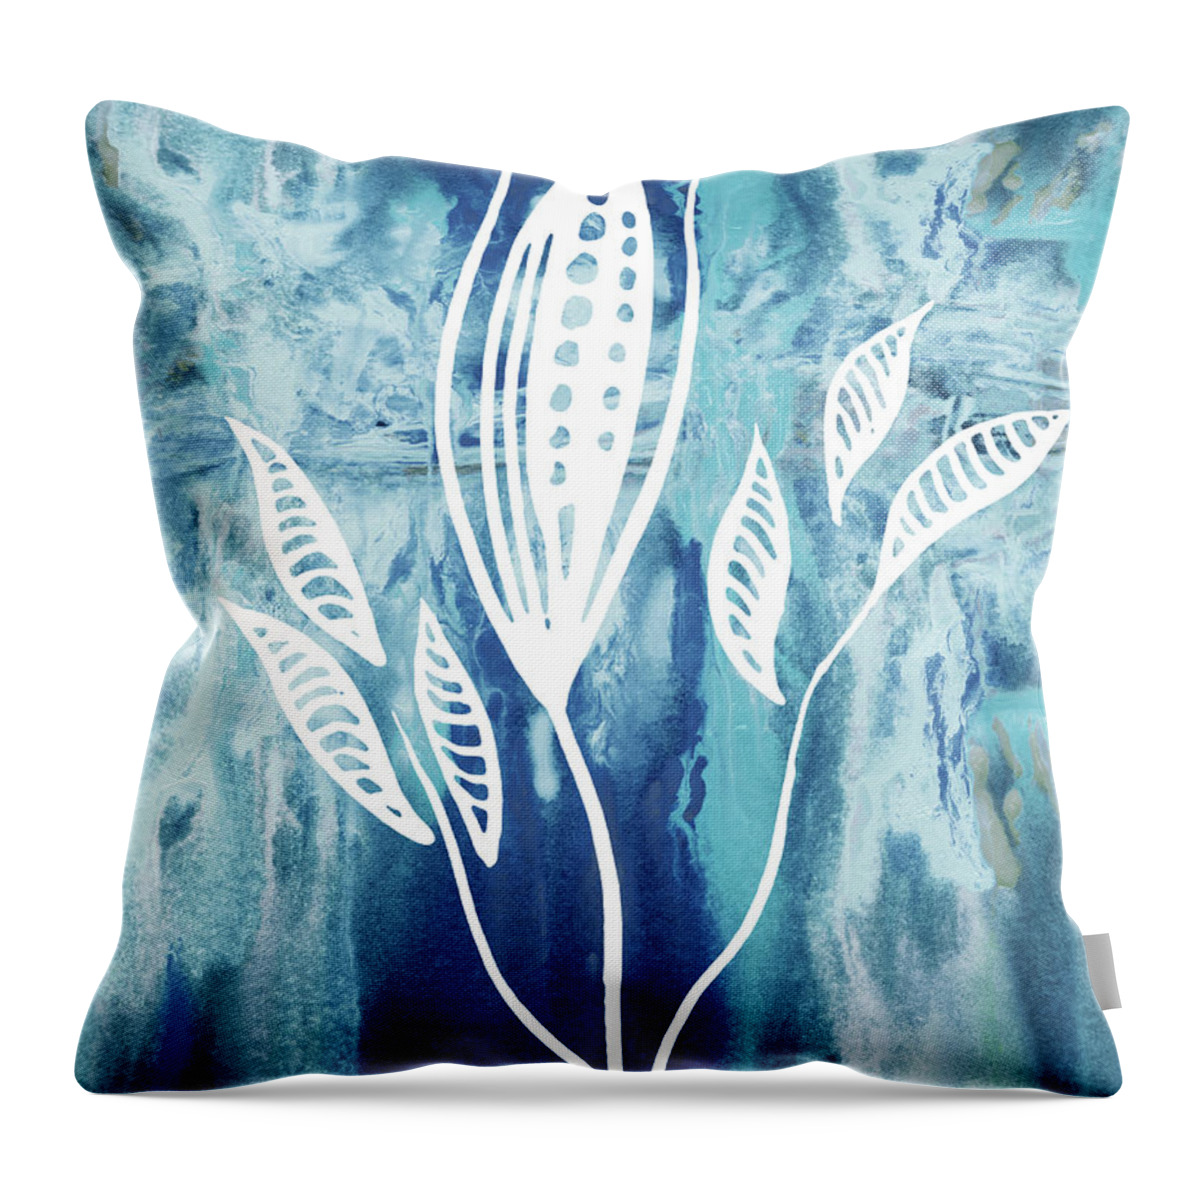 Floral Pattern Throw Pillow featuring the painting Elegant Pattern With Leaves In Teal Blue Watercolor I by Irina Sztukowski